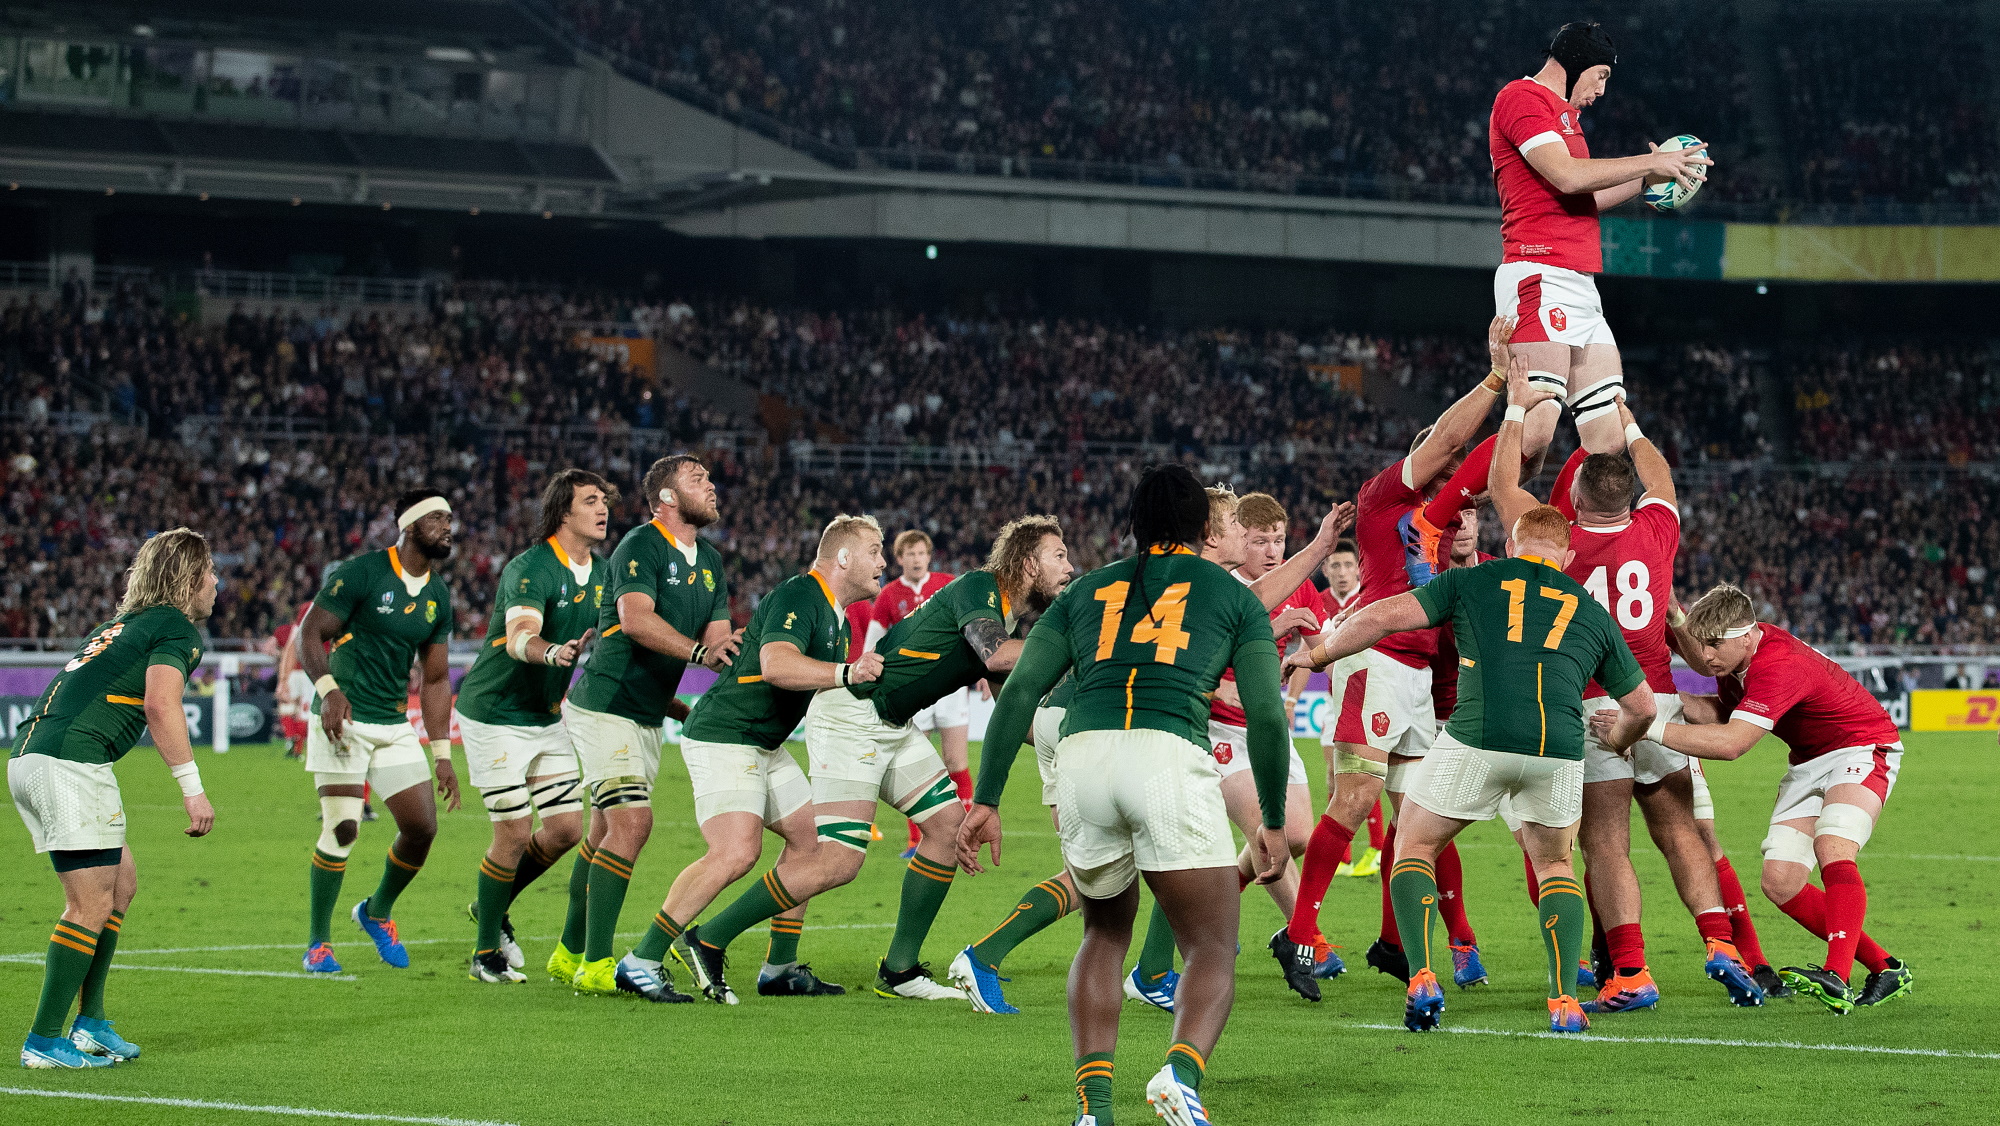 Wales vs South Africa live stream how to watch Autumn International from anywhere TechRadar